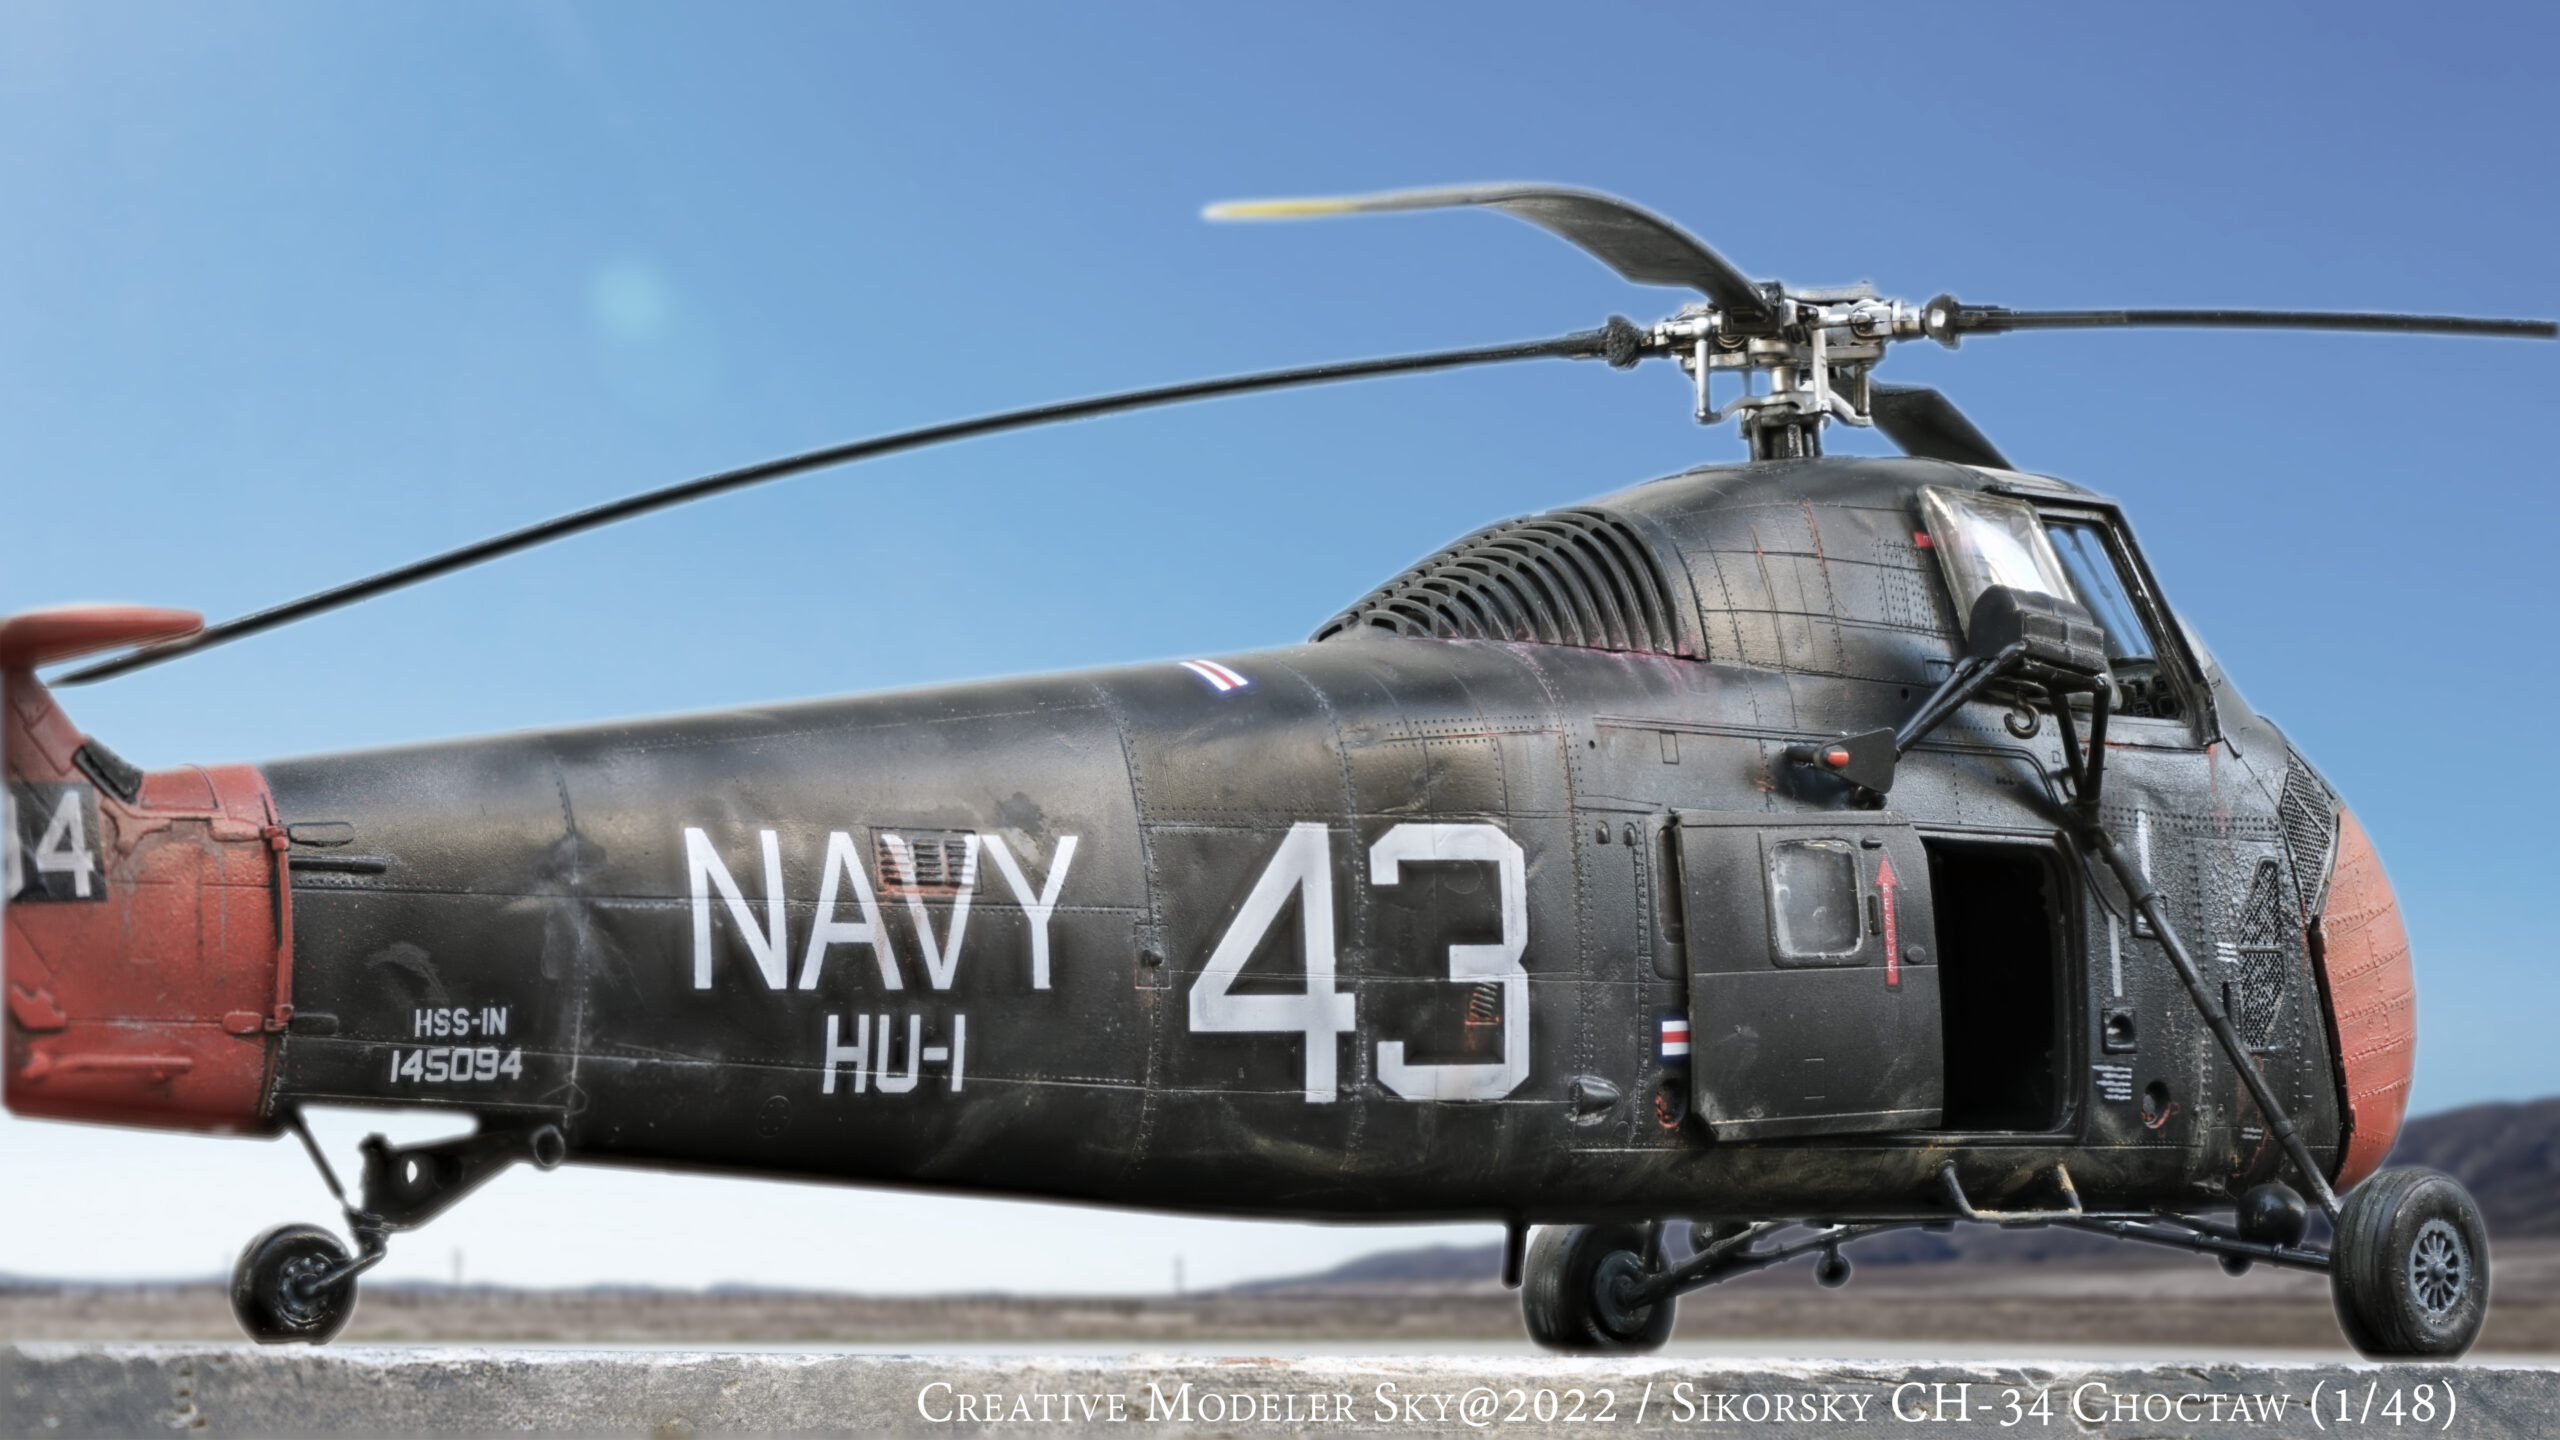 Sikorsky CH-34 Choctaw 1/48, exploring the possible presentation of uneven surfaces